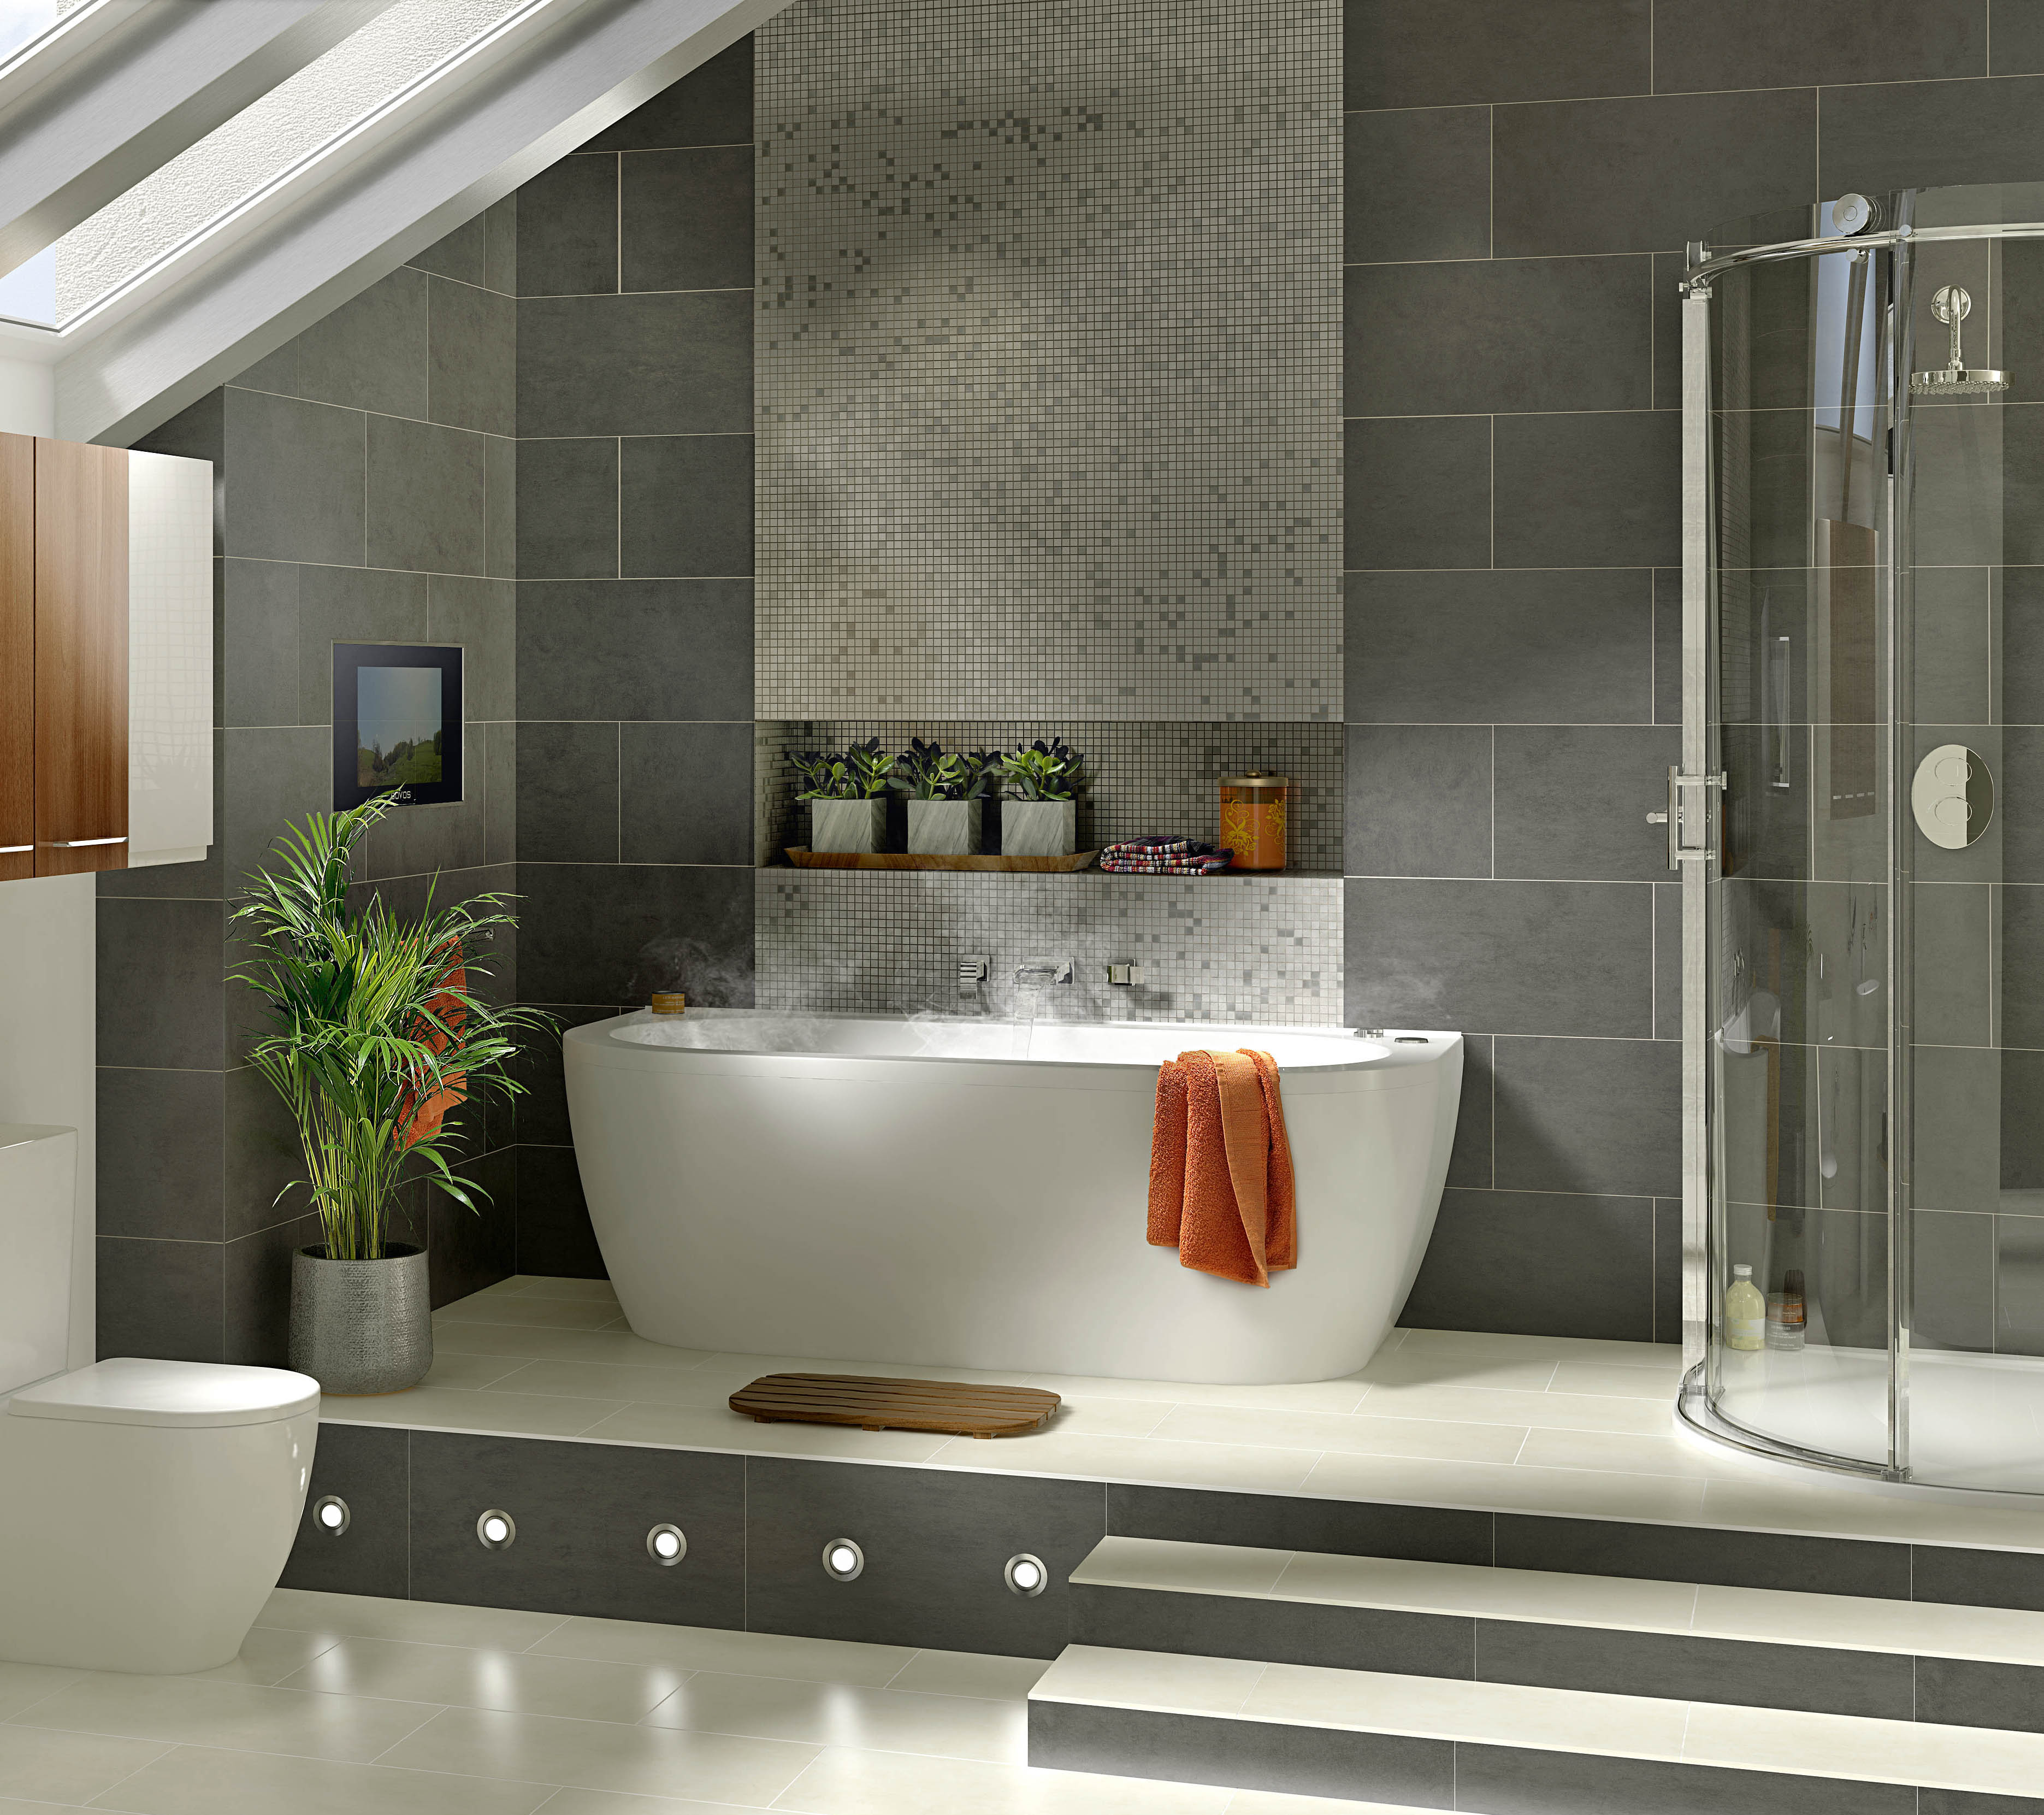 bathroom-attractive-efficient-bathroom-design-showing-grey-tiles-walls-ideas-and-white-oval-bathtub-with-clear-glass-semi-circle-shower-room-as-well-as-bathroom-tile-designs-plus-bathroom-design